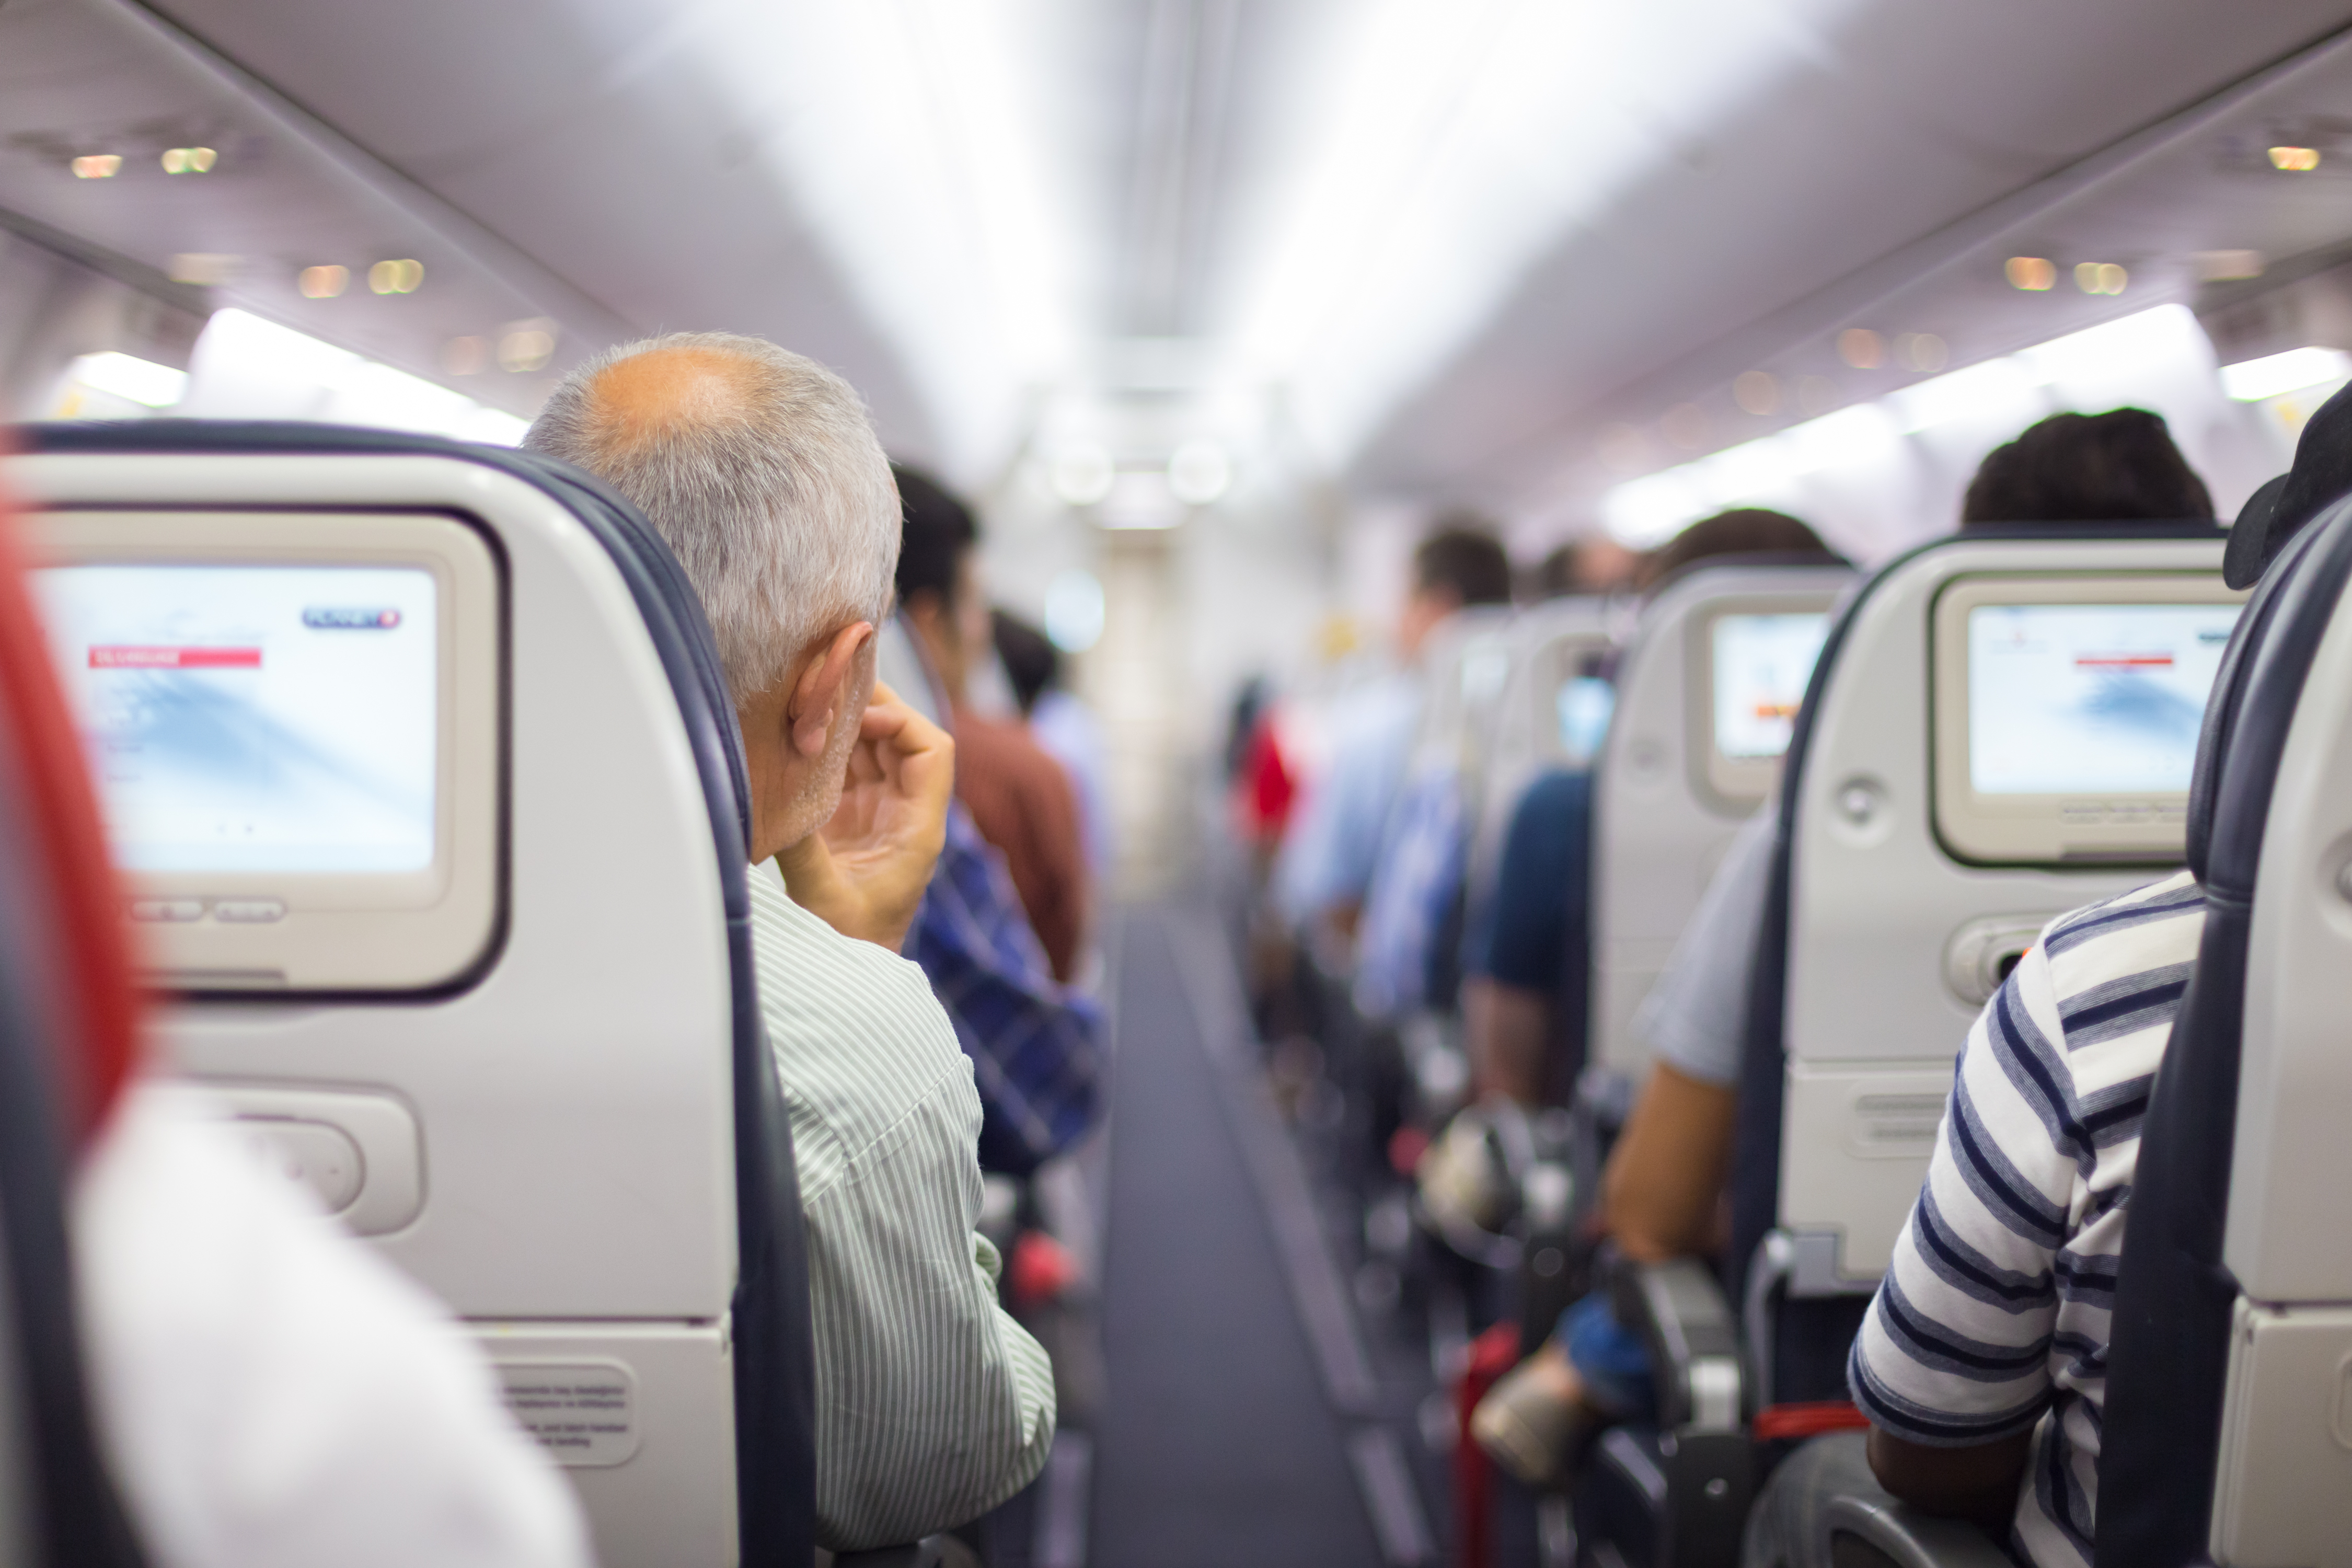 Passengers in an airplane | Source: Shutterstock